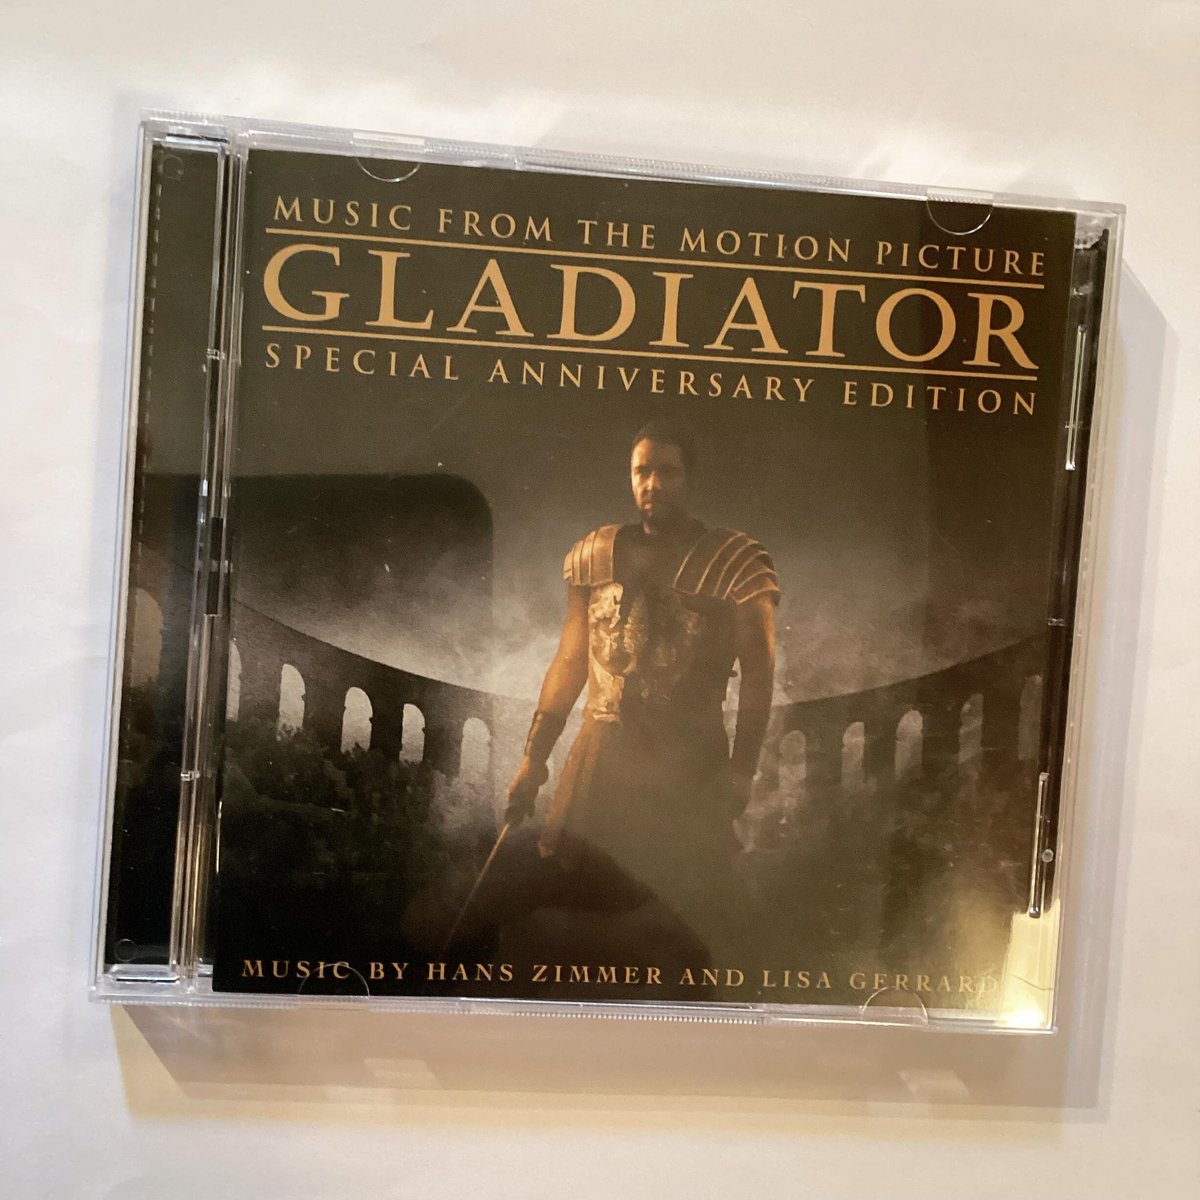 The 2-CD 'Special Anniversary Edition' of Hans Zimmer's 'Gladiator' soundtrack is a true joy! Contains every alternate version and unused, often improvised bit with Hans' comments. #hanszimmer #gladiator #ridleyscott #filmmusic #soundtrack #movie #movies #film #films @HansZimmer